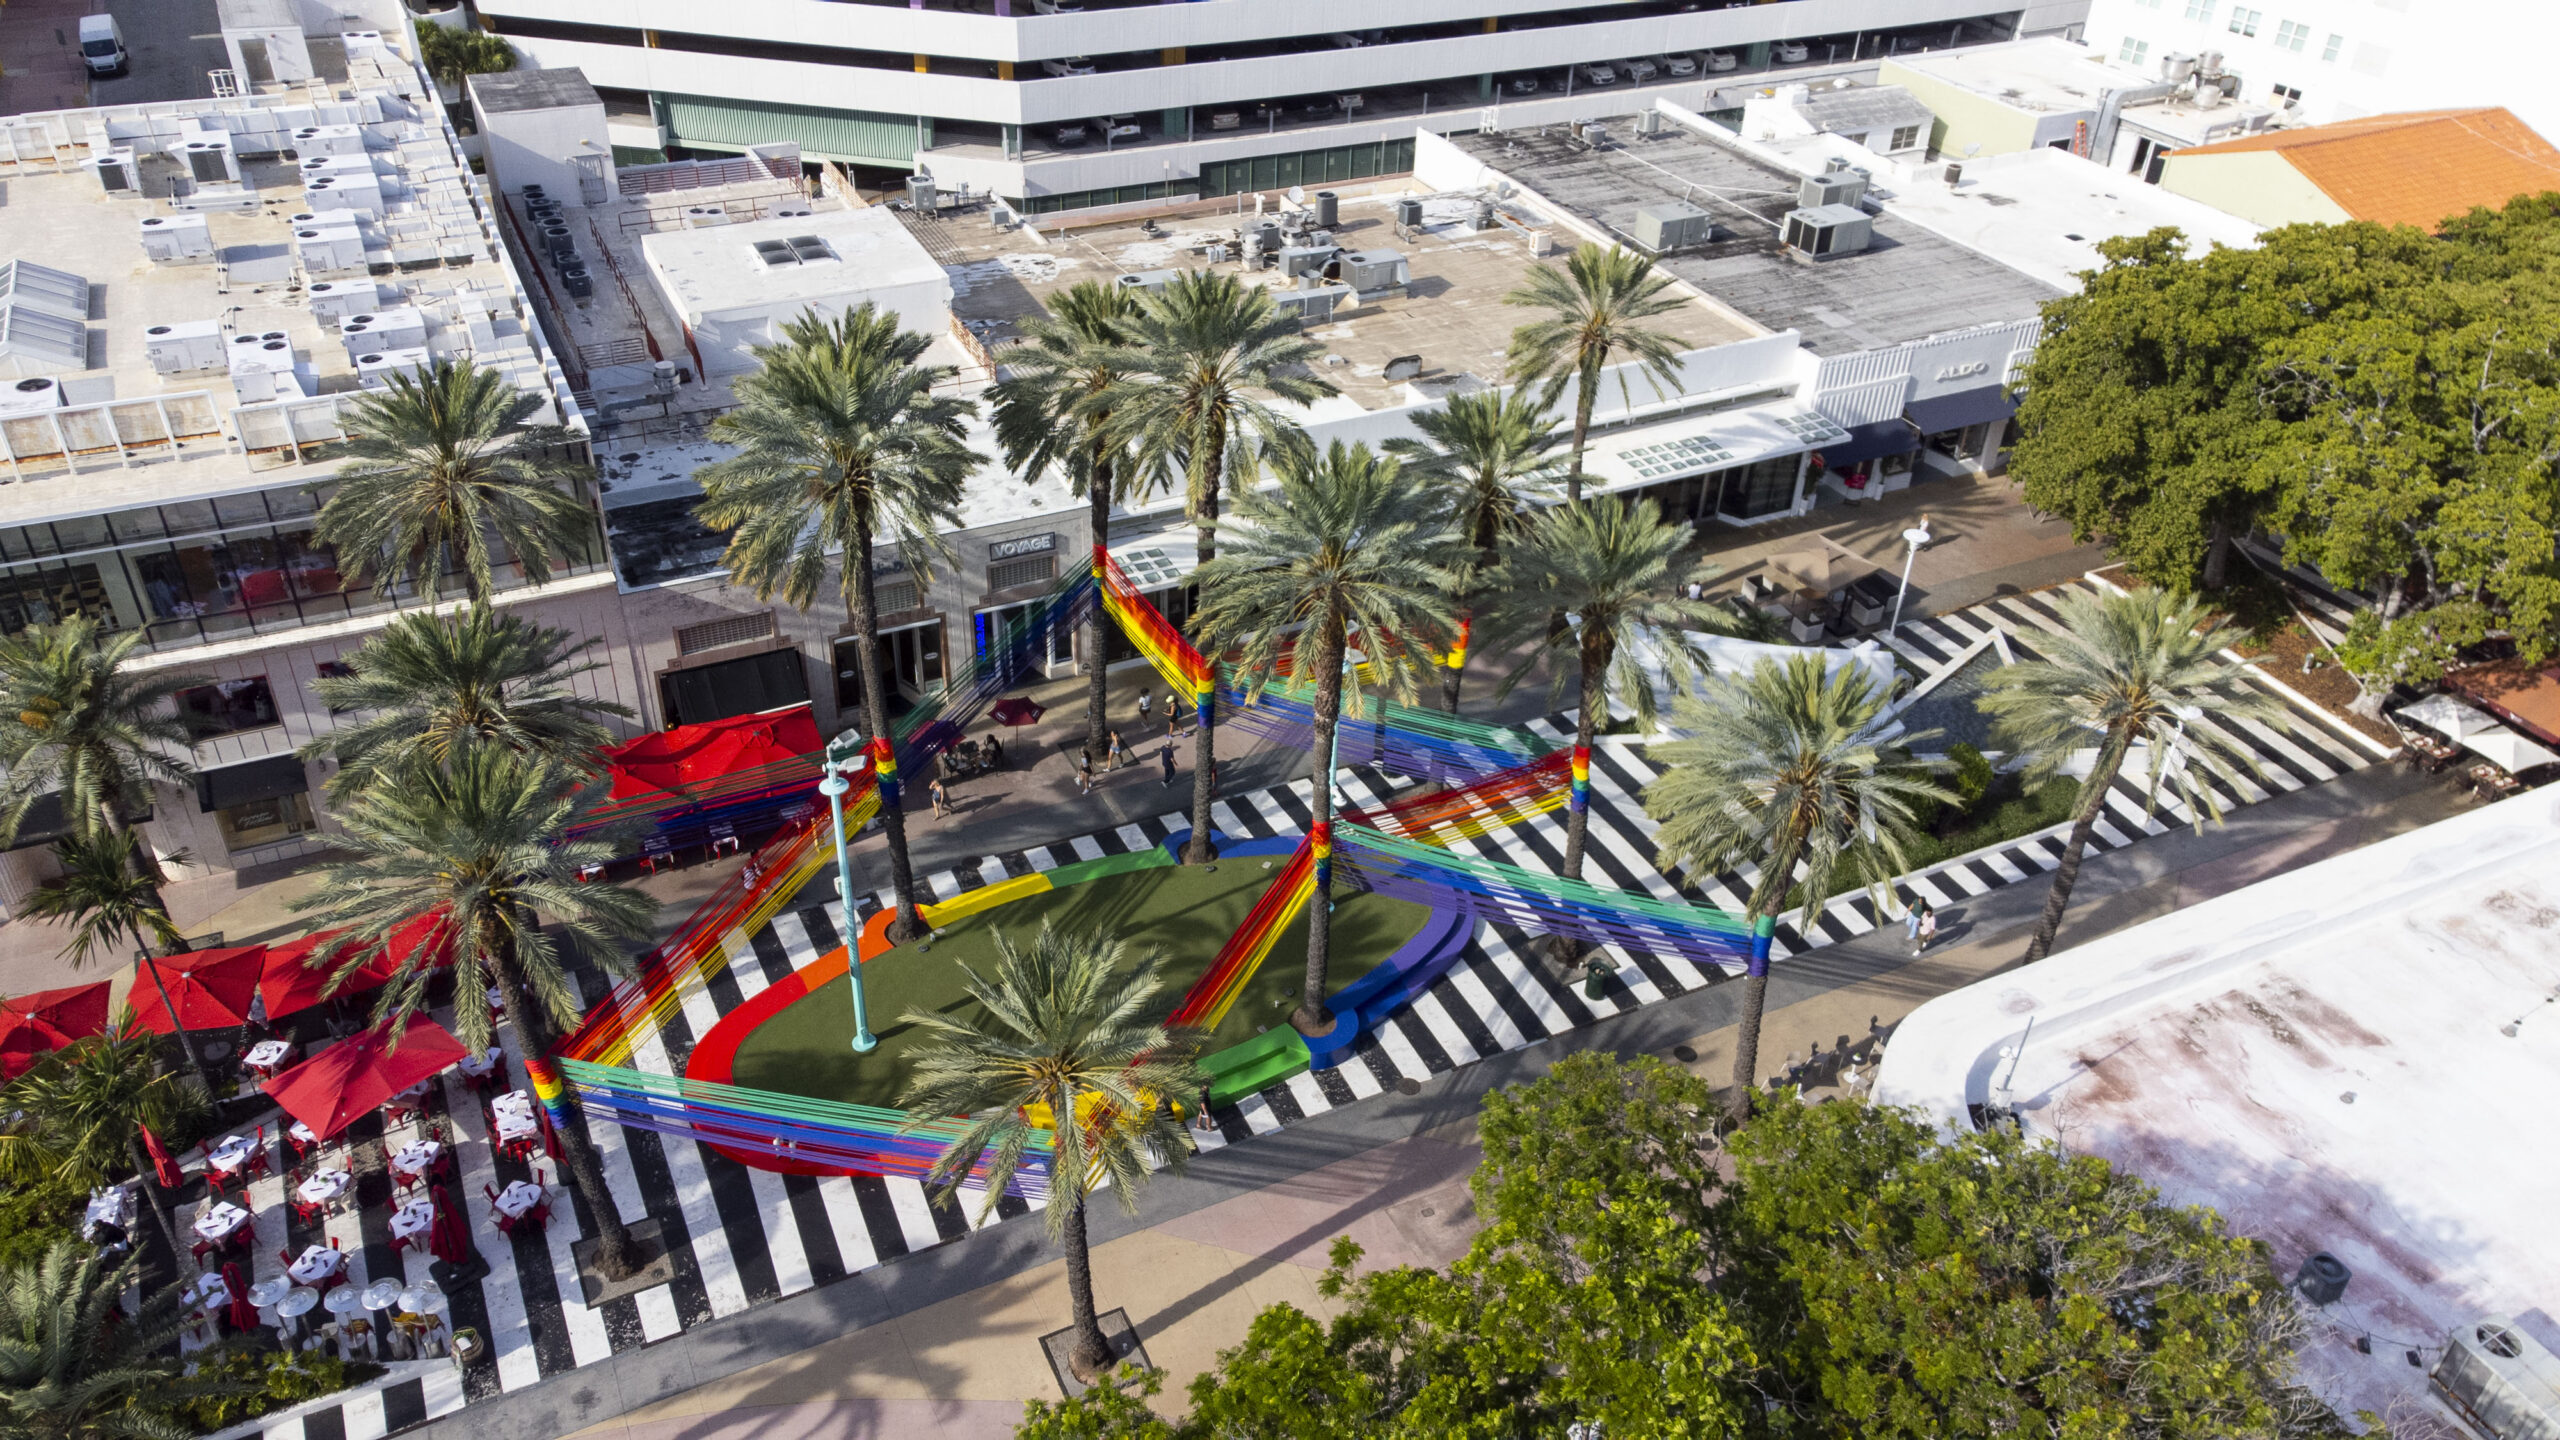 Pride Lights The Night on Lincoln Road